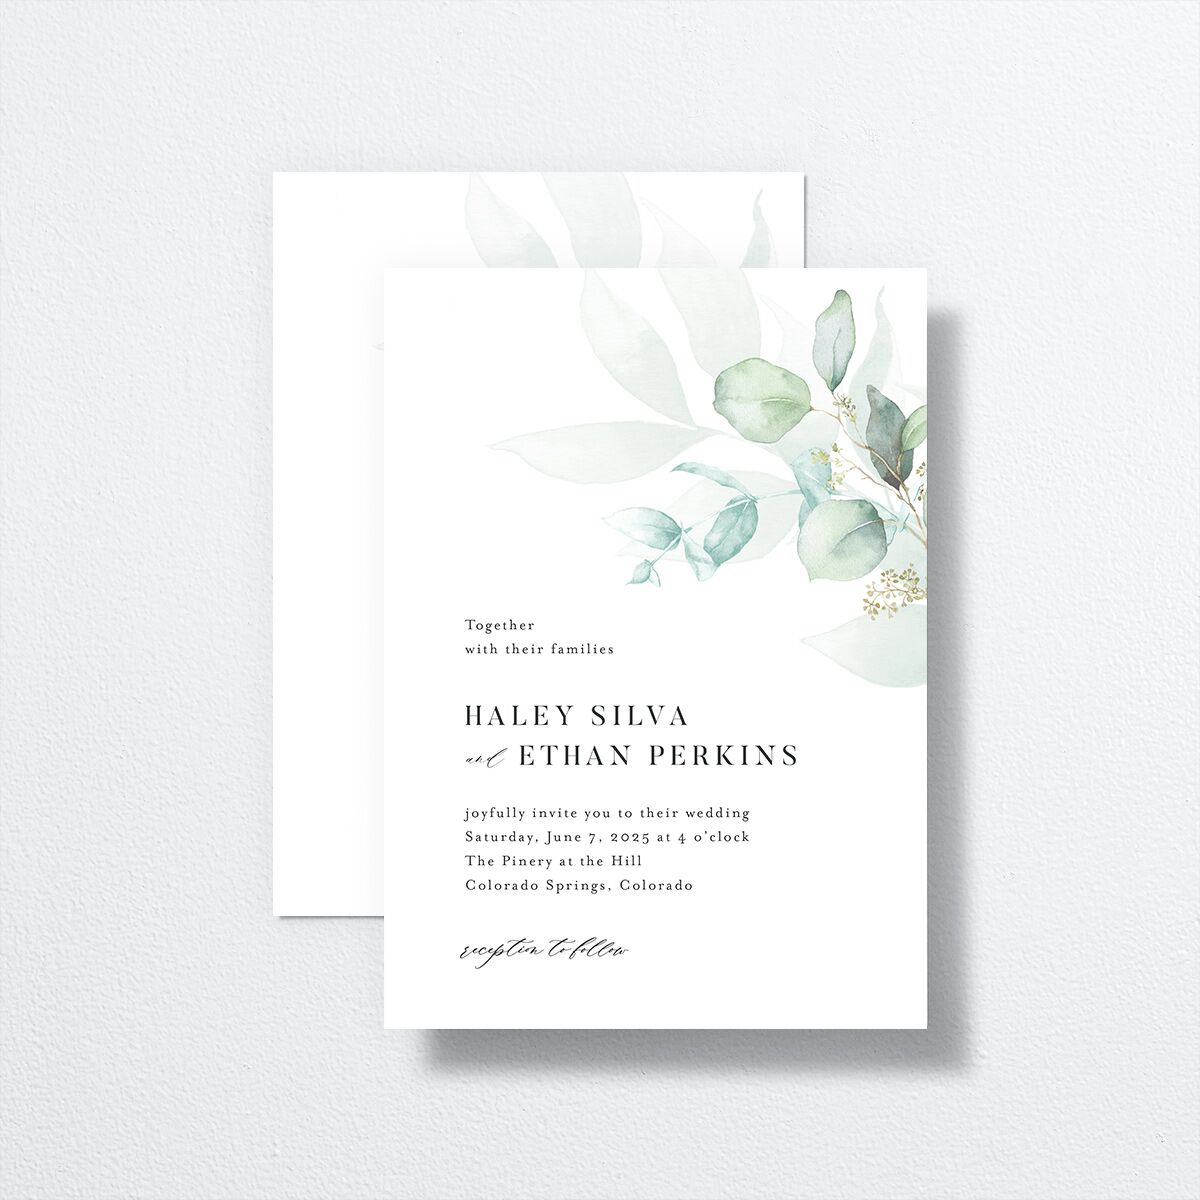 Romantic Greenery Wedding Invitations front-and-back in green